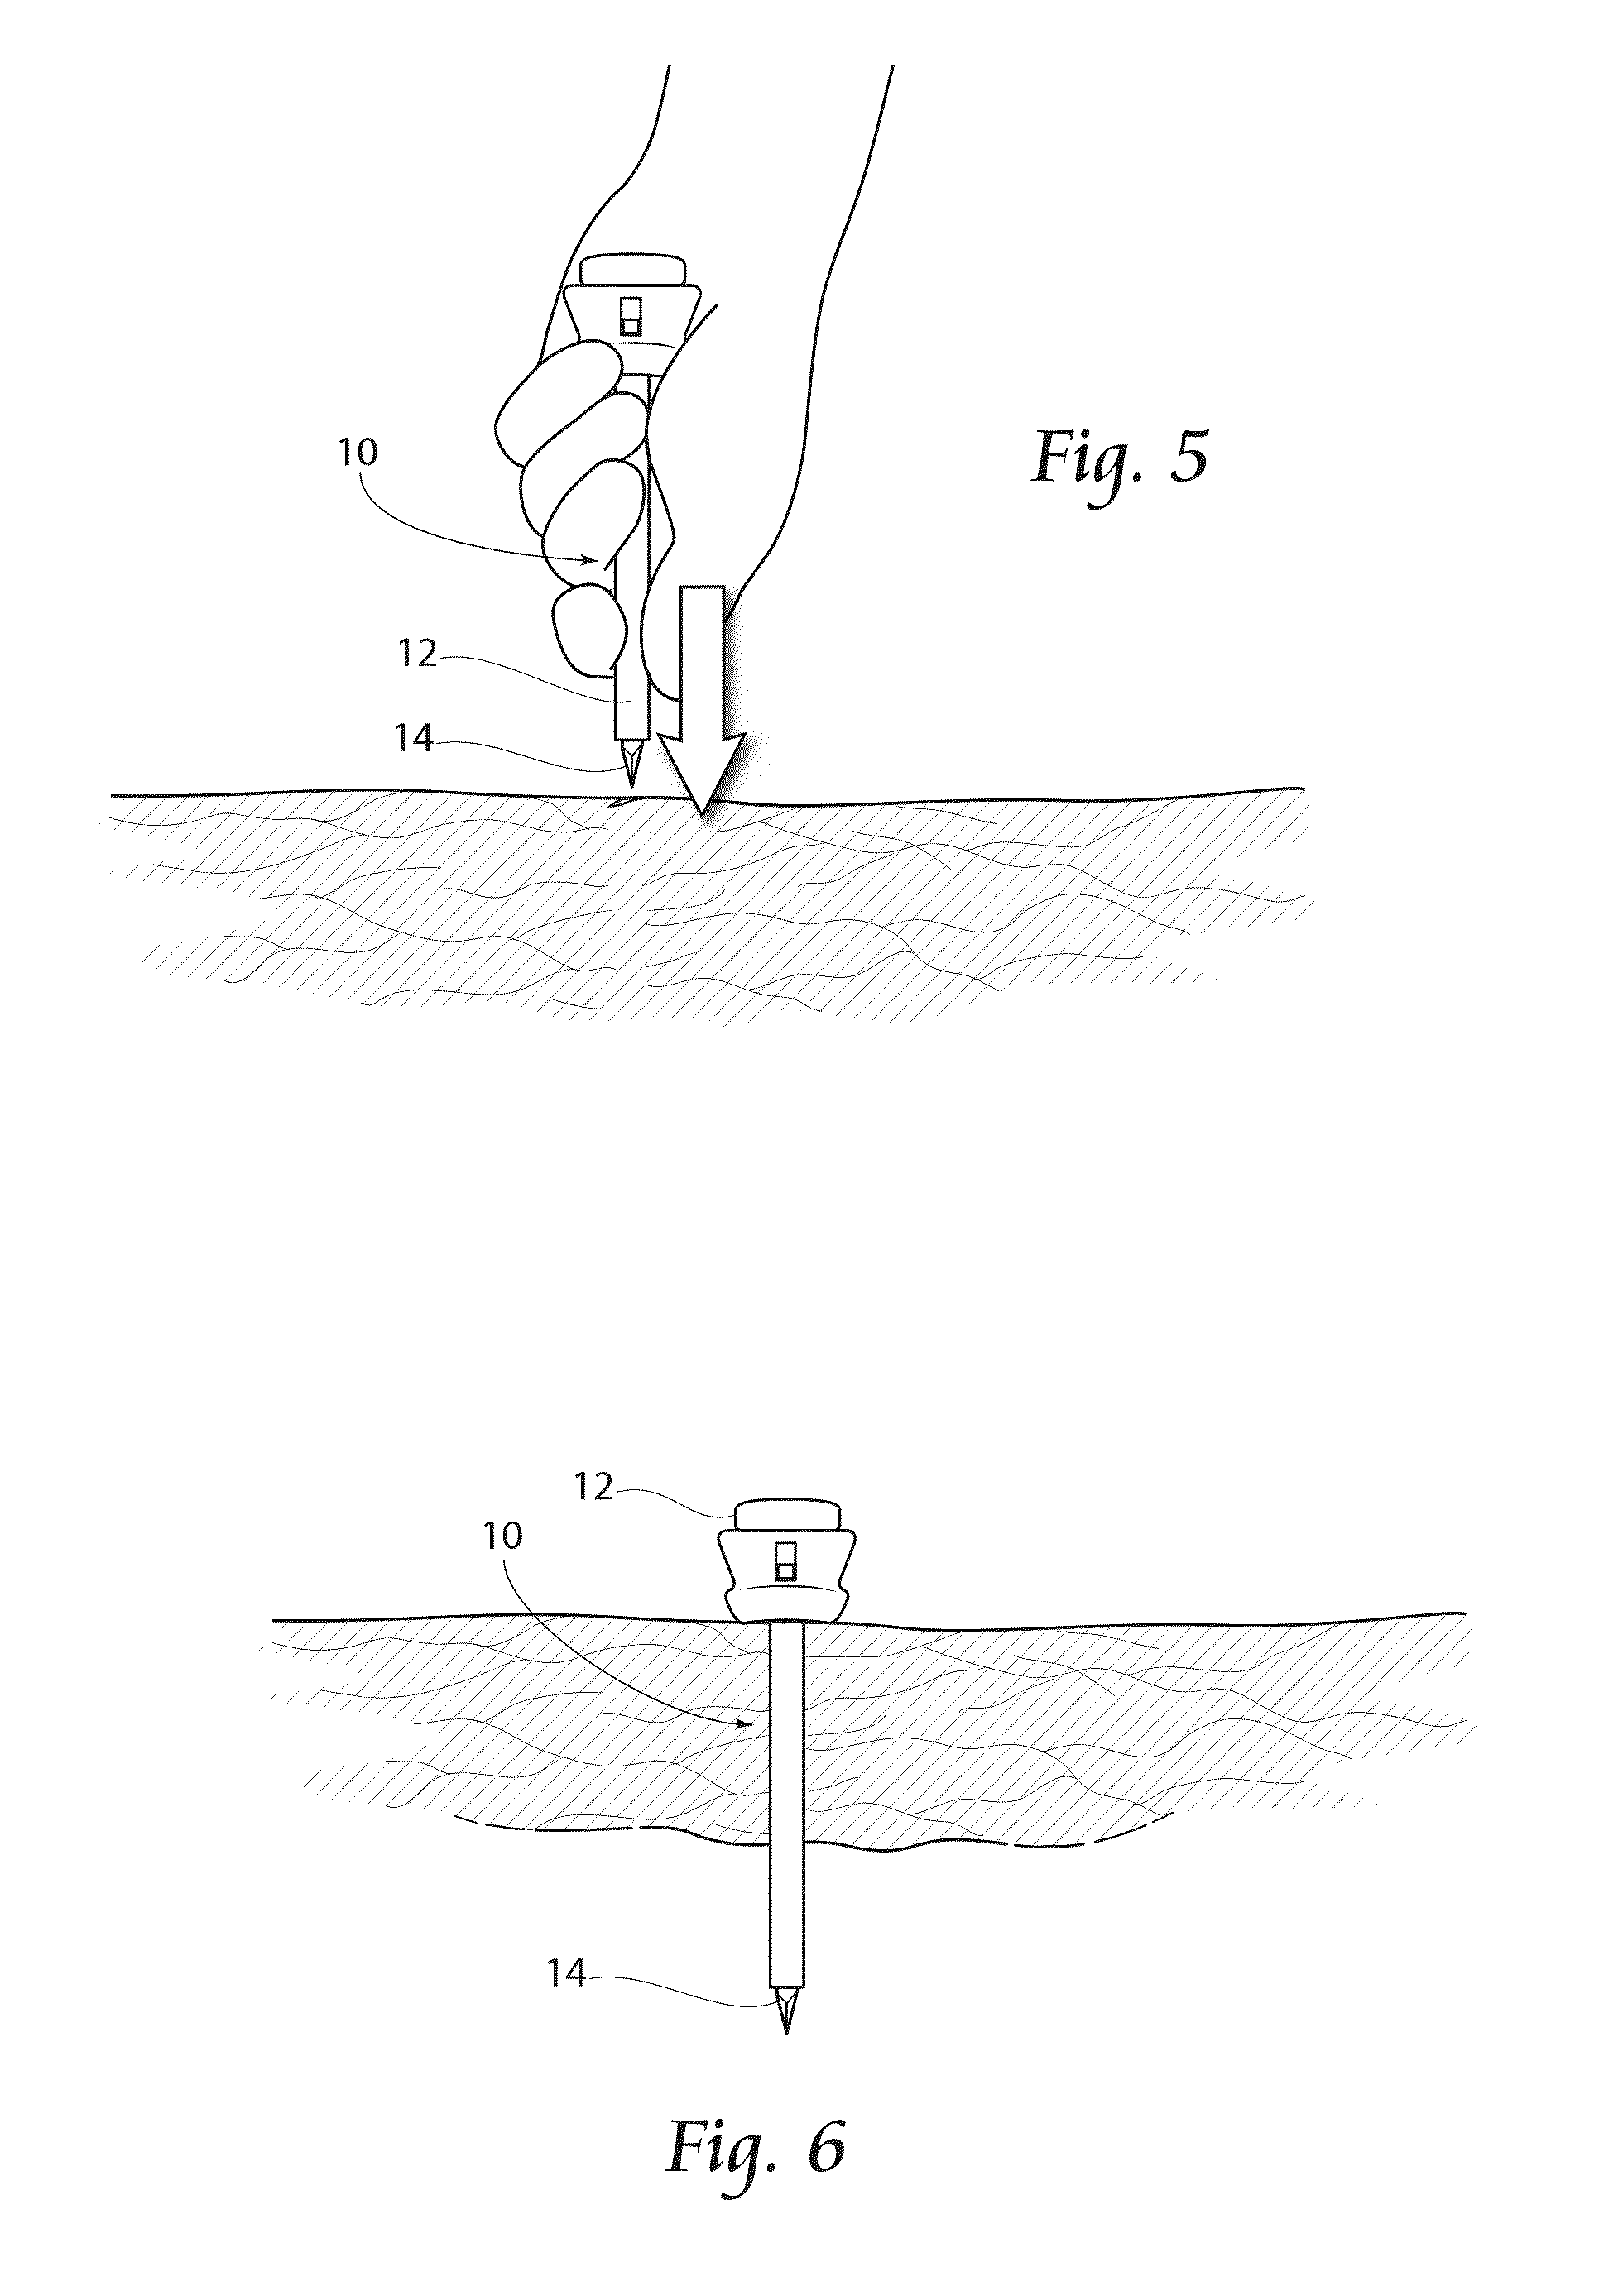 Minimally Invasive Endoscopic/Laparoscopic Highly Absorbent Surgical Devices, Methods and System